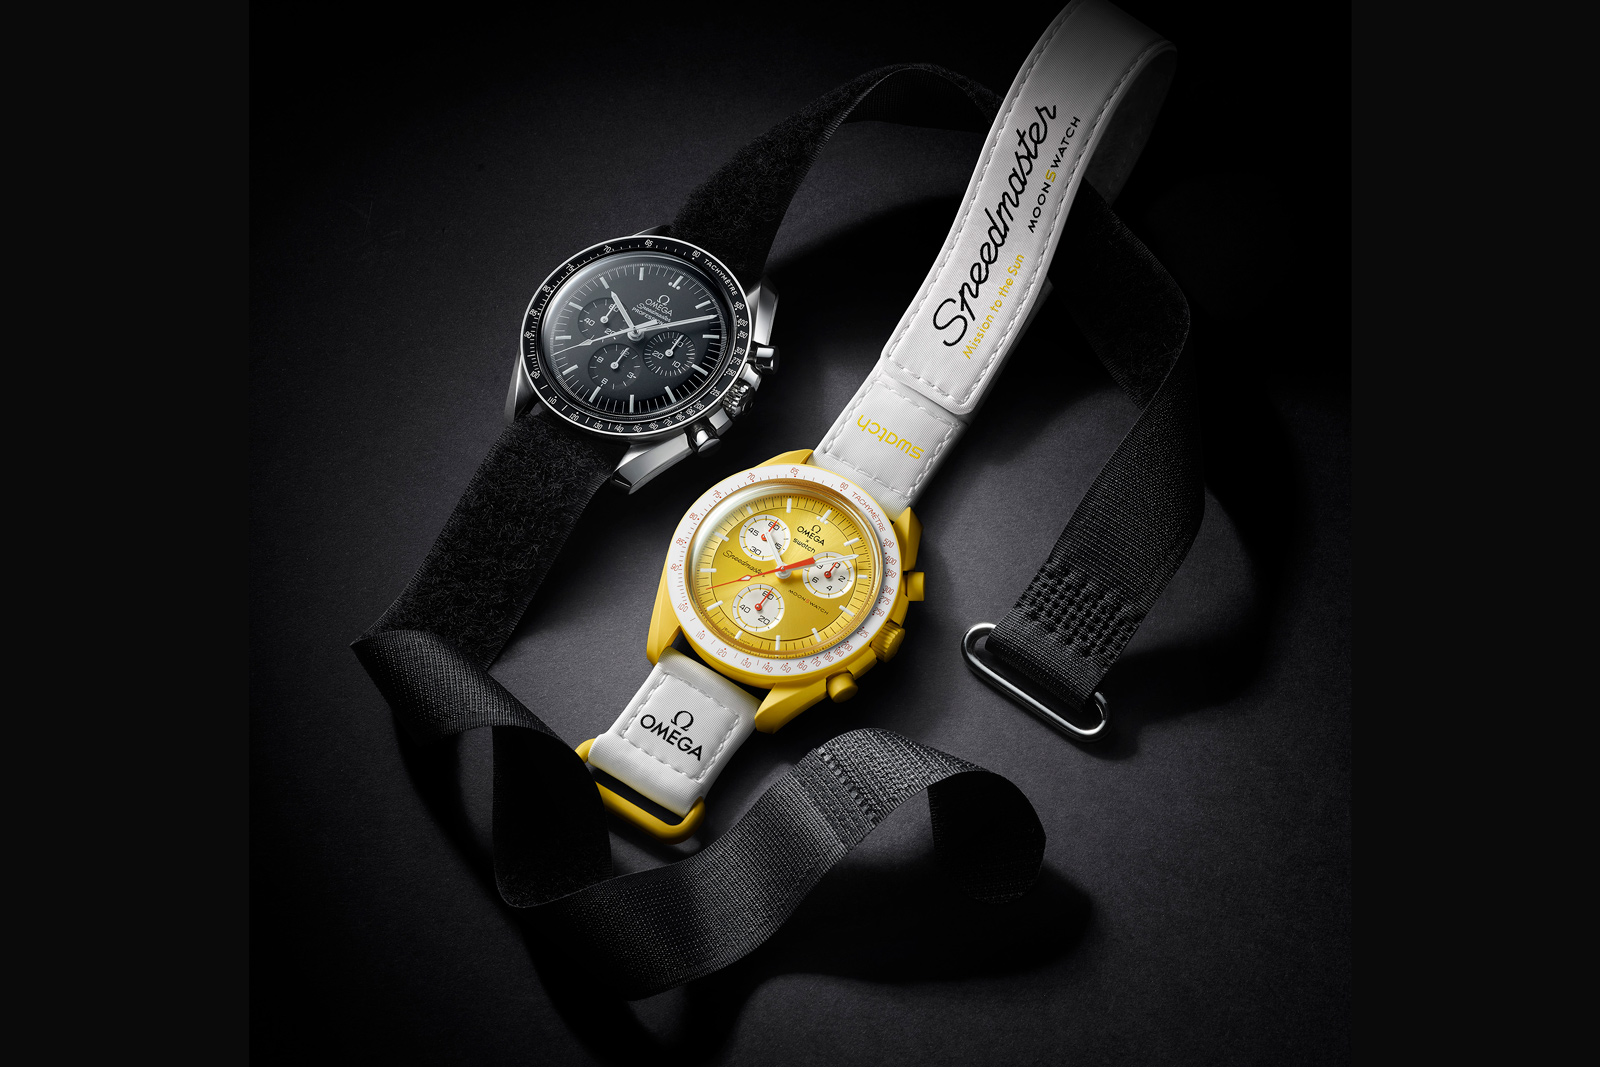 Solar System of Affordable 'MoonSwatches' from Omega & Swatch